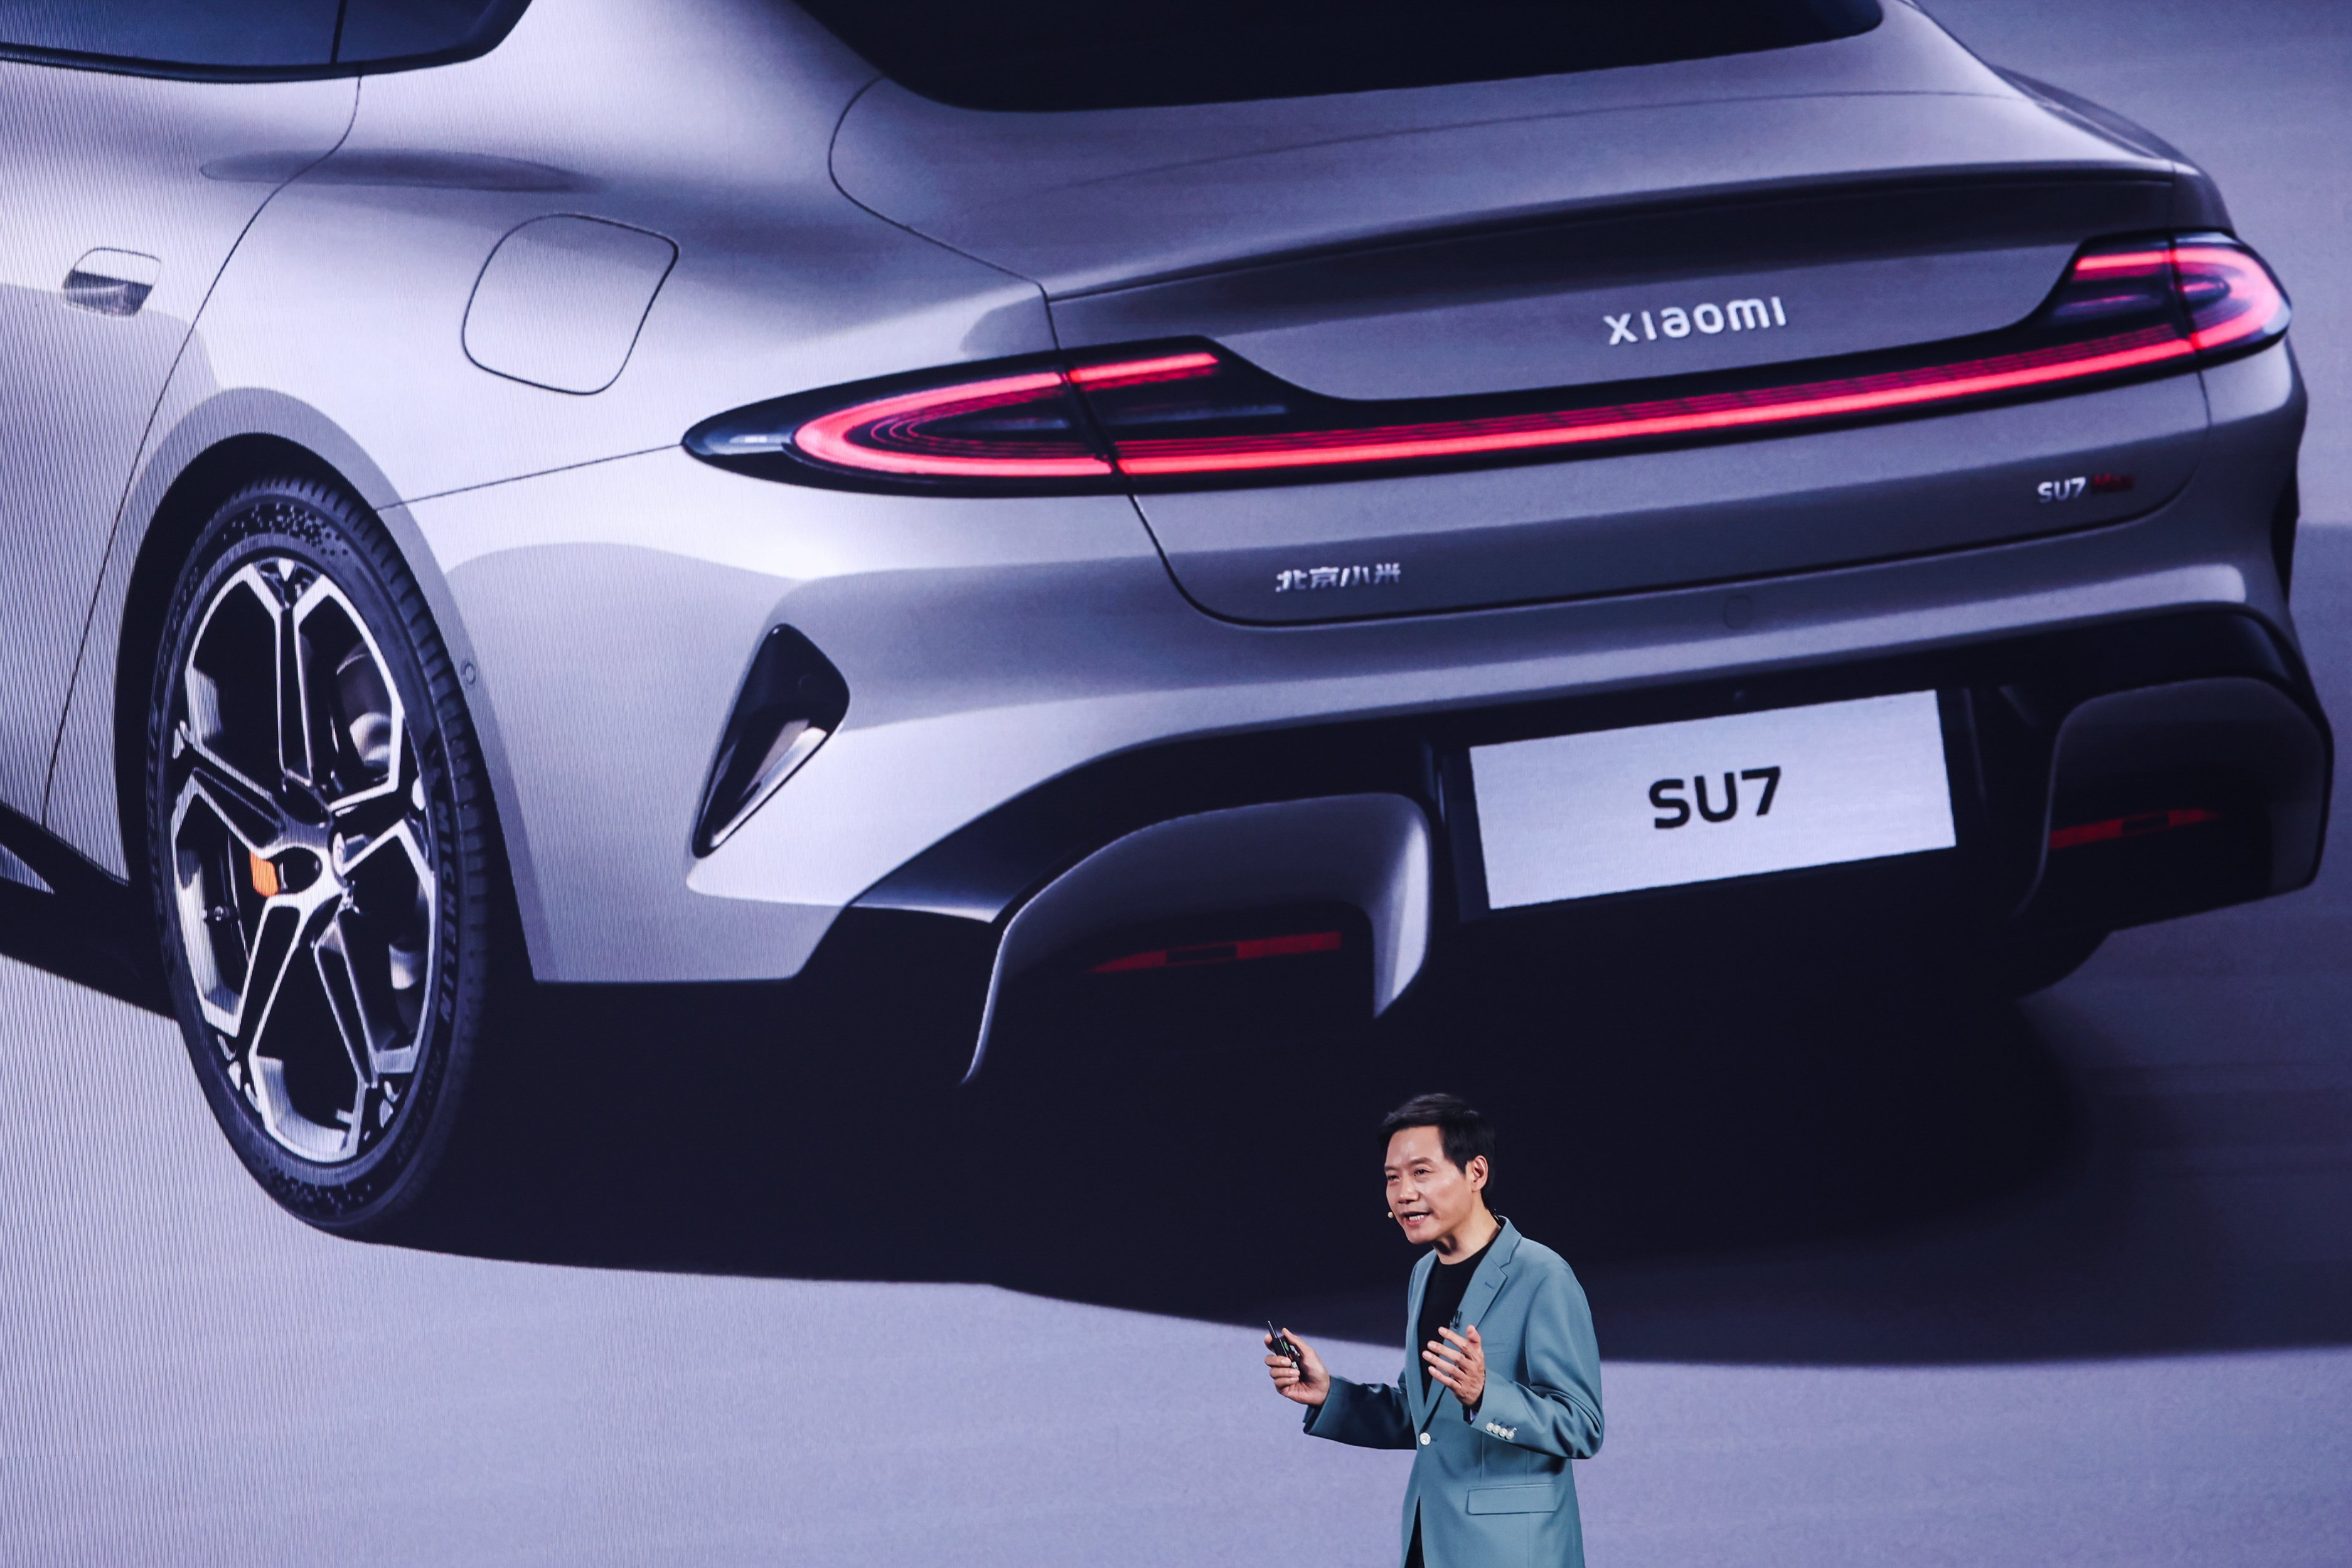 Lei Jun, founder and CEO of Xiaomi, speaks during the SU7 electric car launch ceremony in Beijing on Thursday. Photo: EPA-EFE